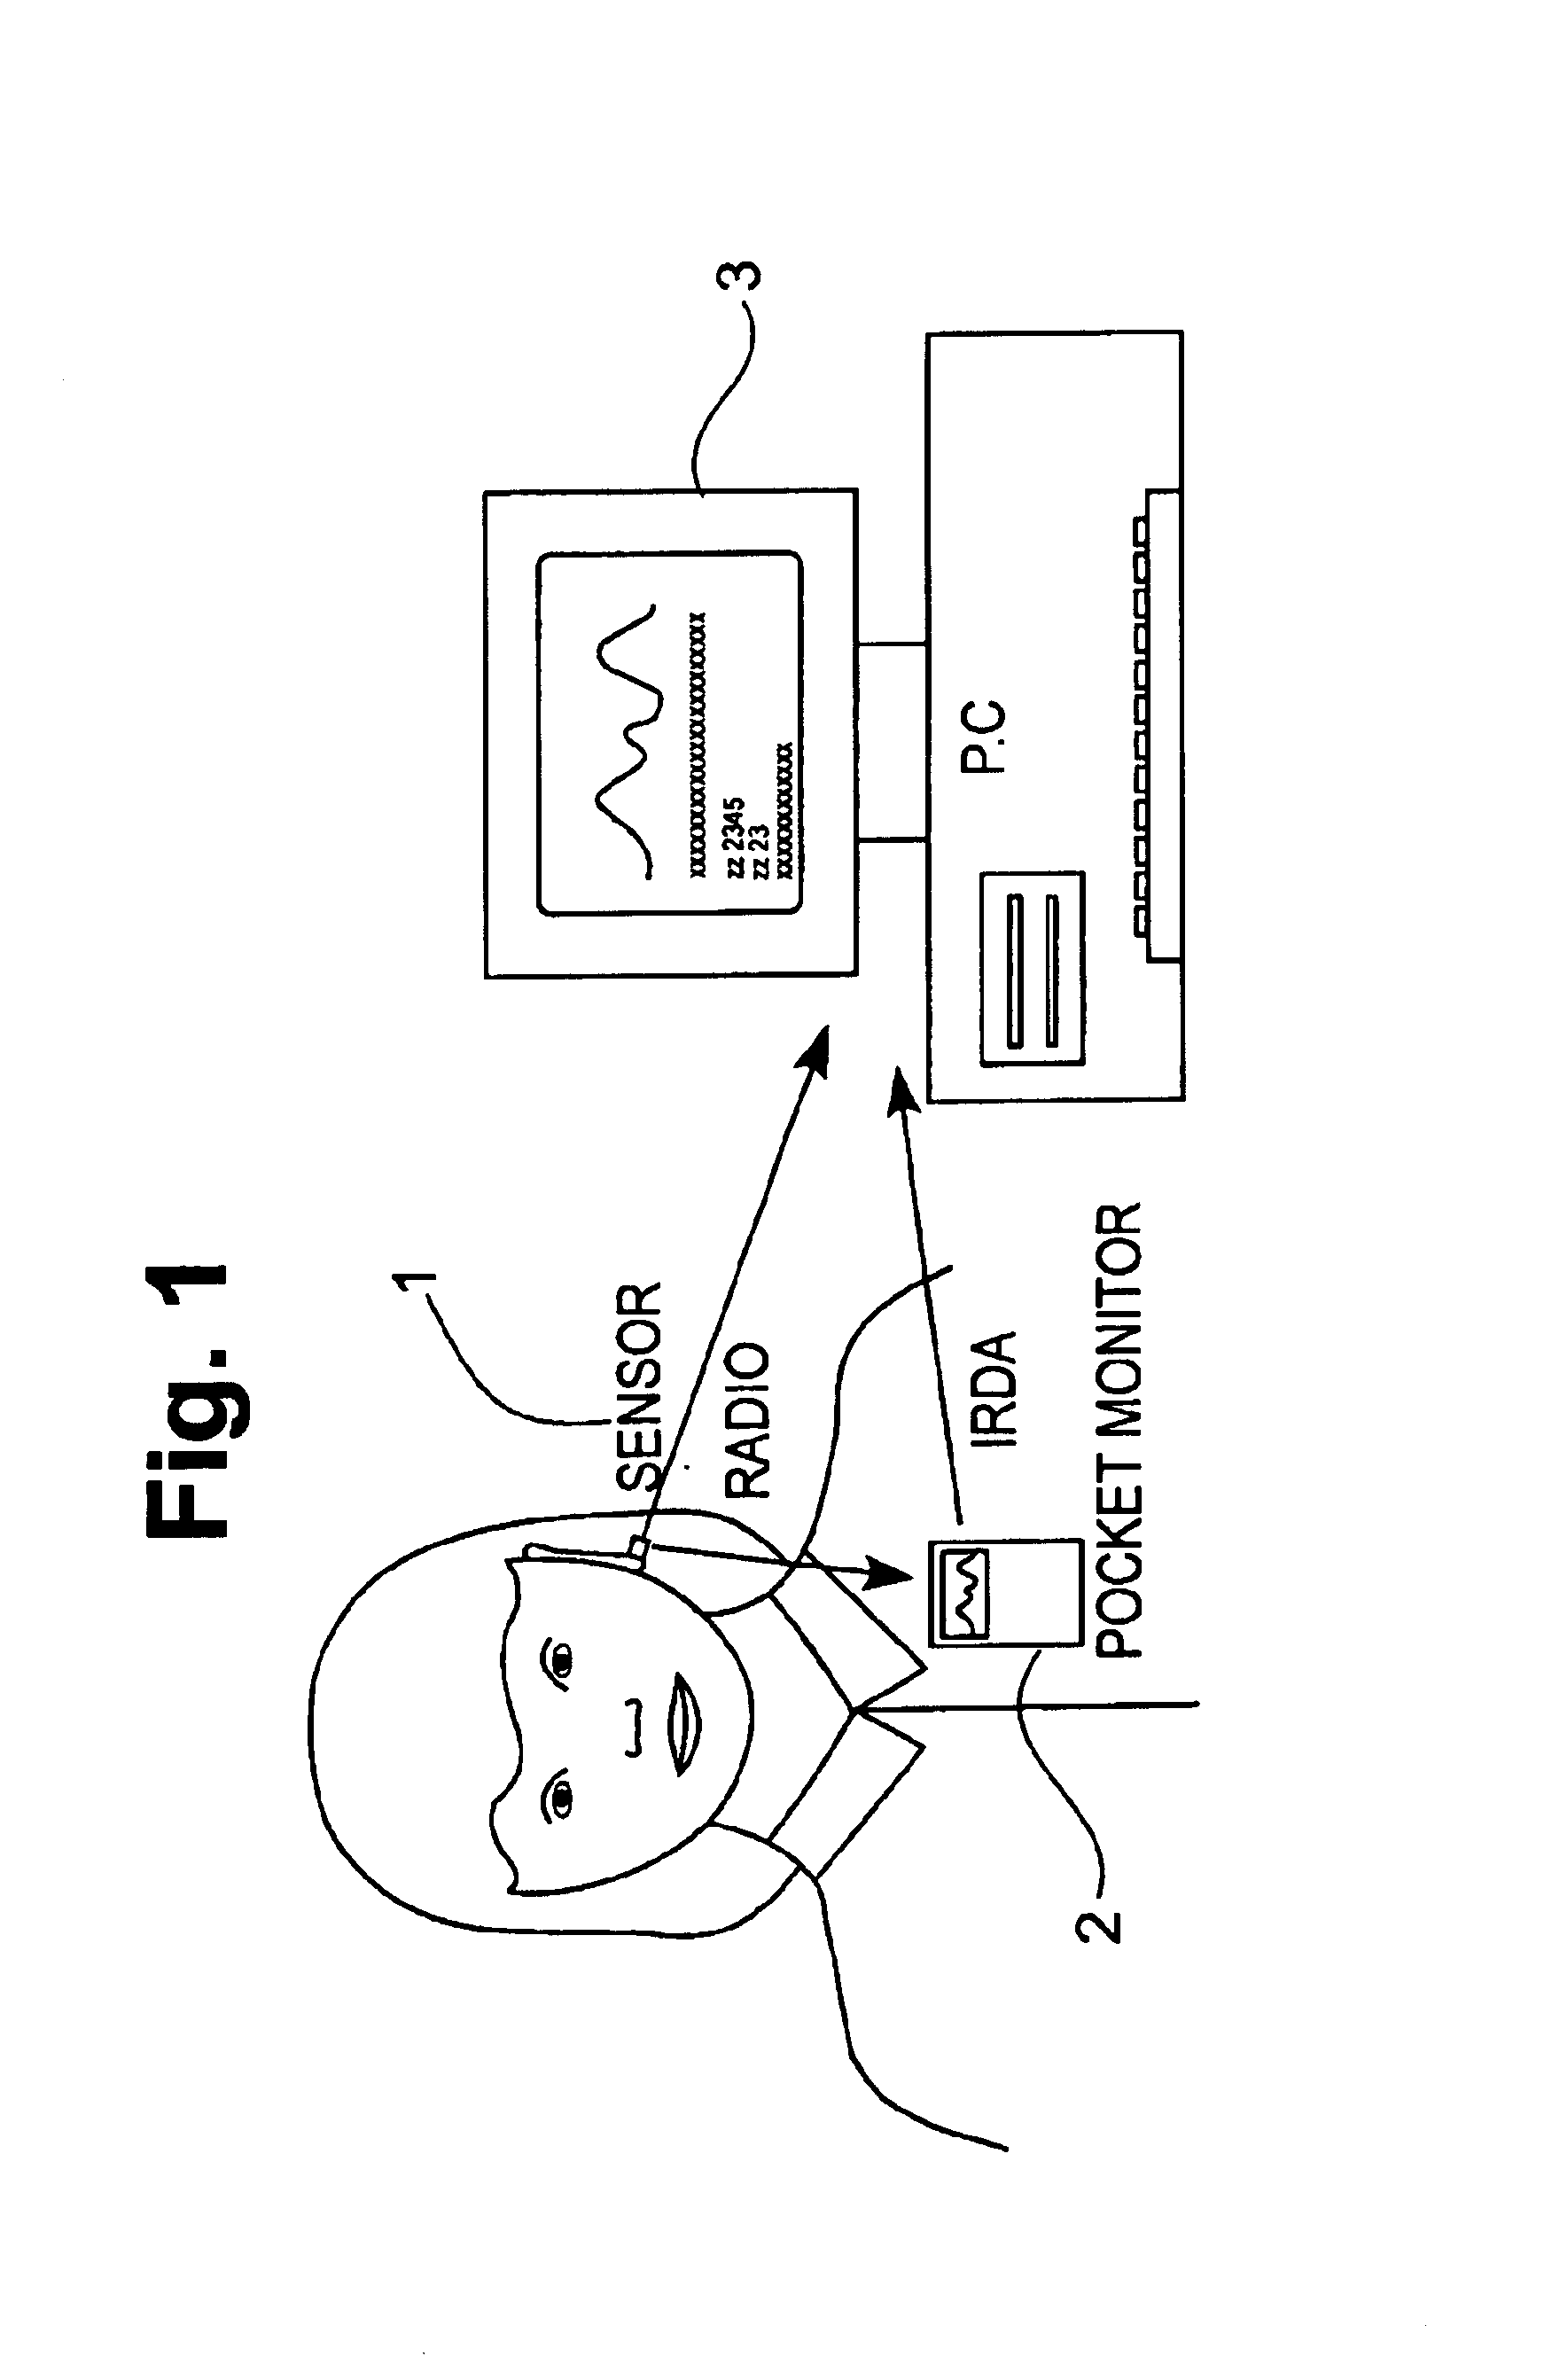 Non-invasive blood analyte measuring system and method utilizing optical absorption